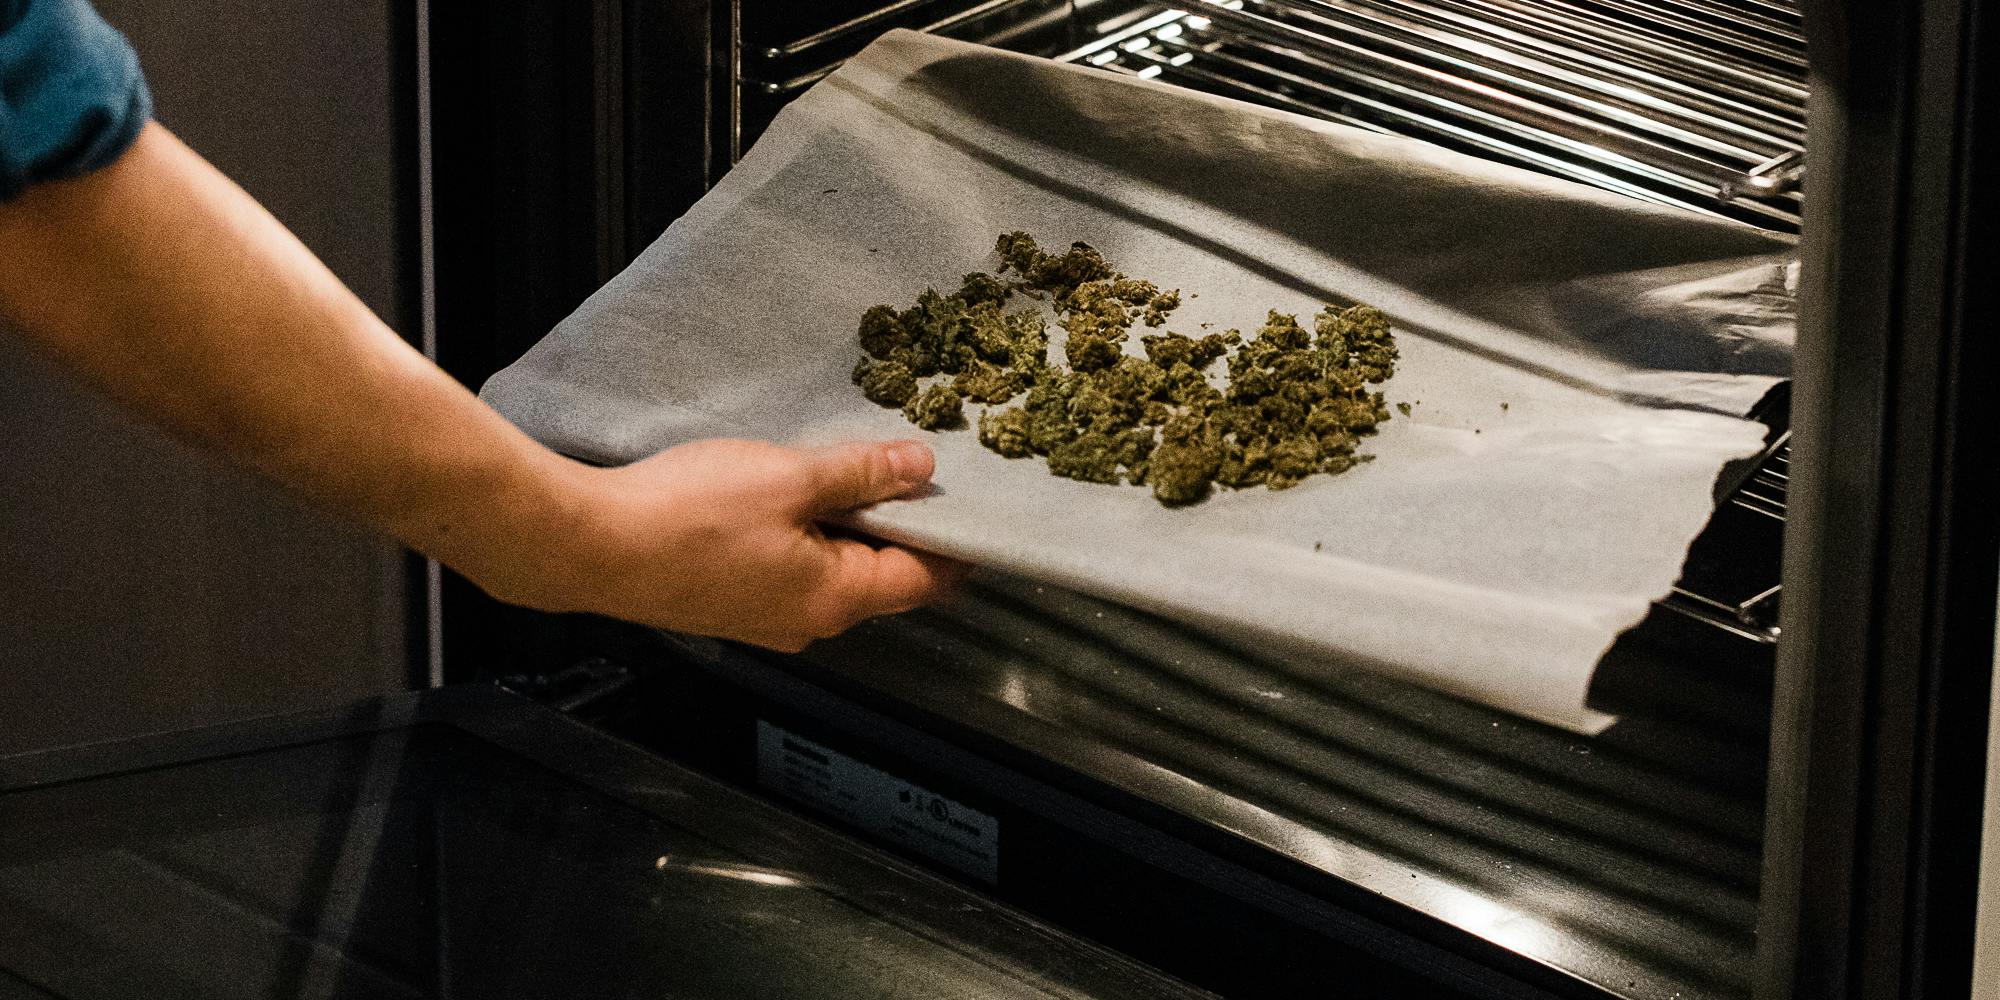 Cannabis flower on a cooking sheet being inserted into an oven. In this article, Herb explores if cooking with cannabis gets rid of the THC.